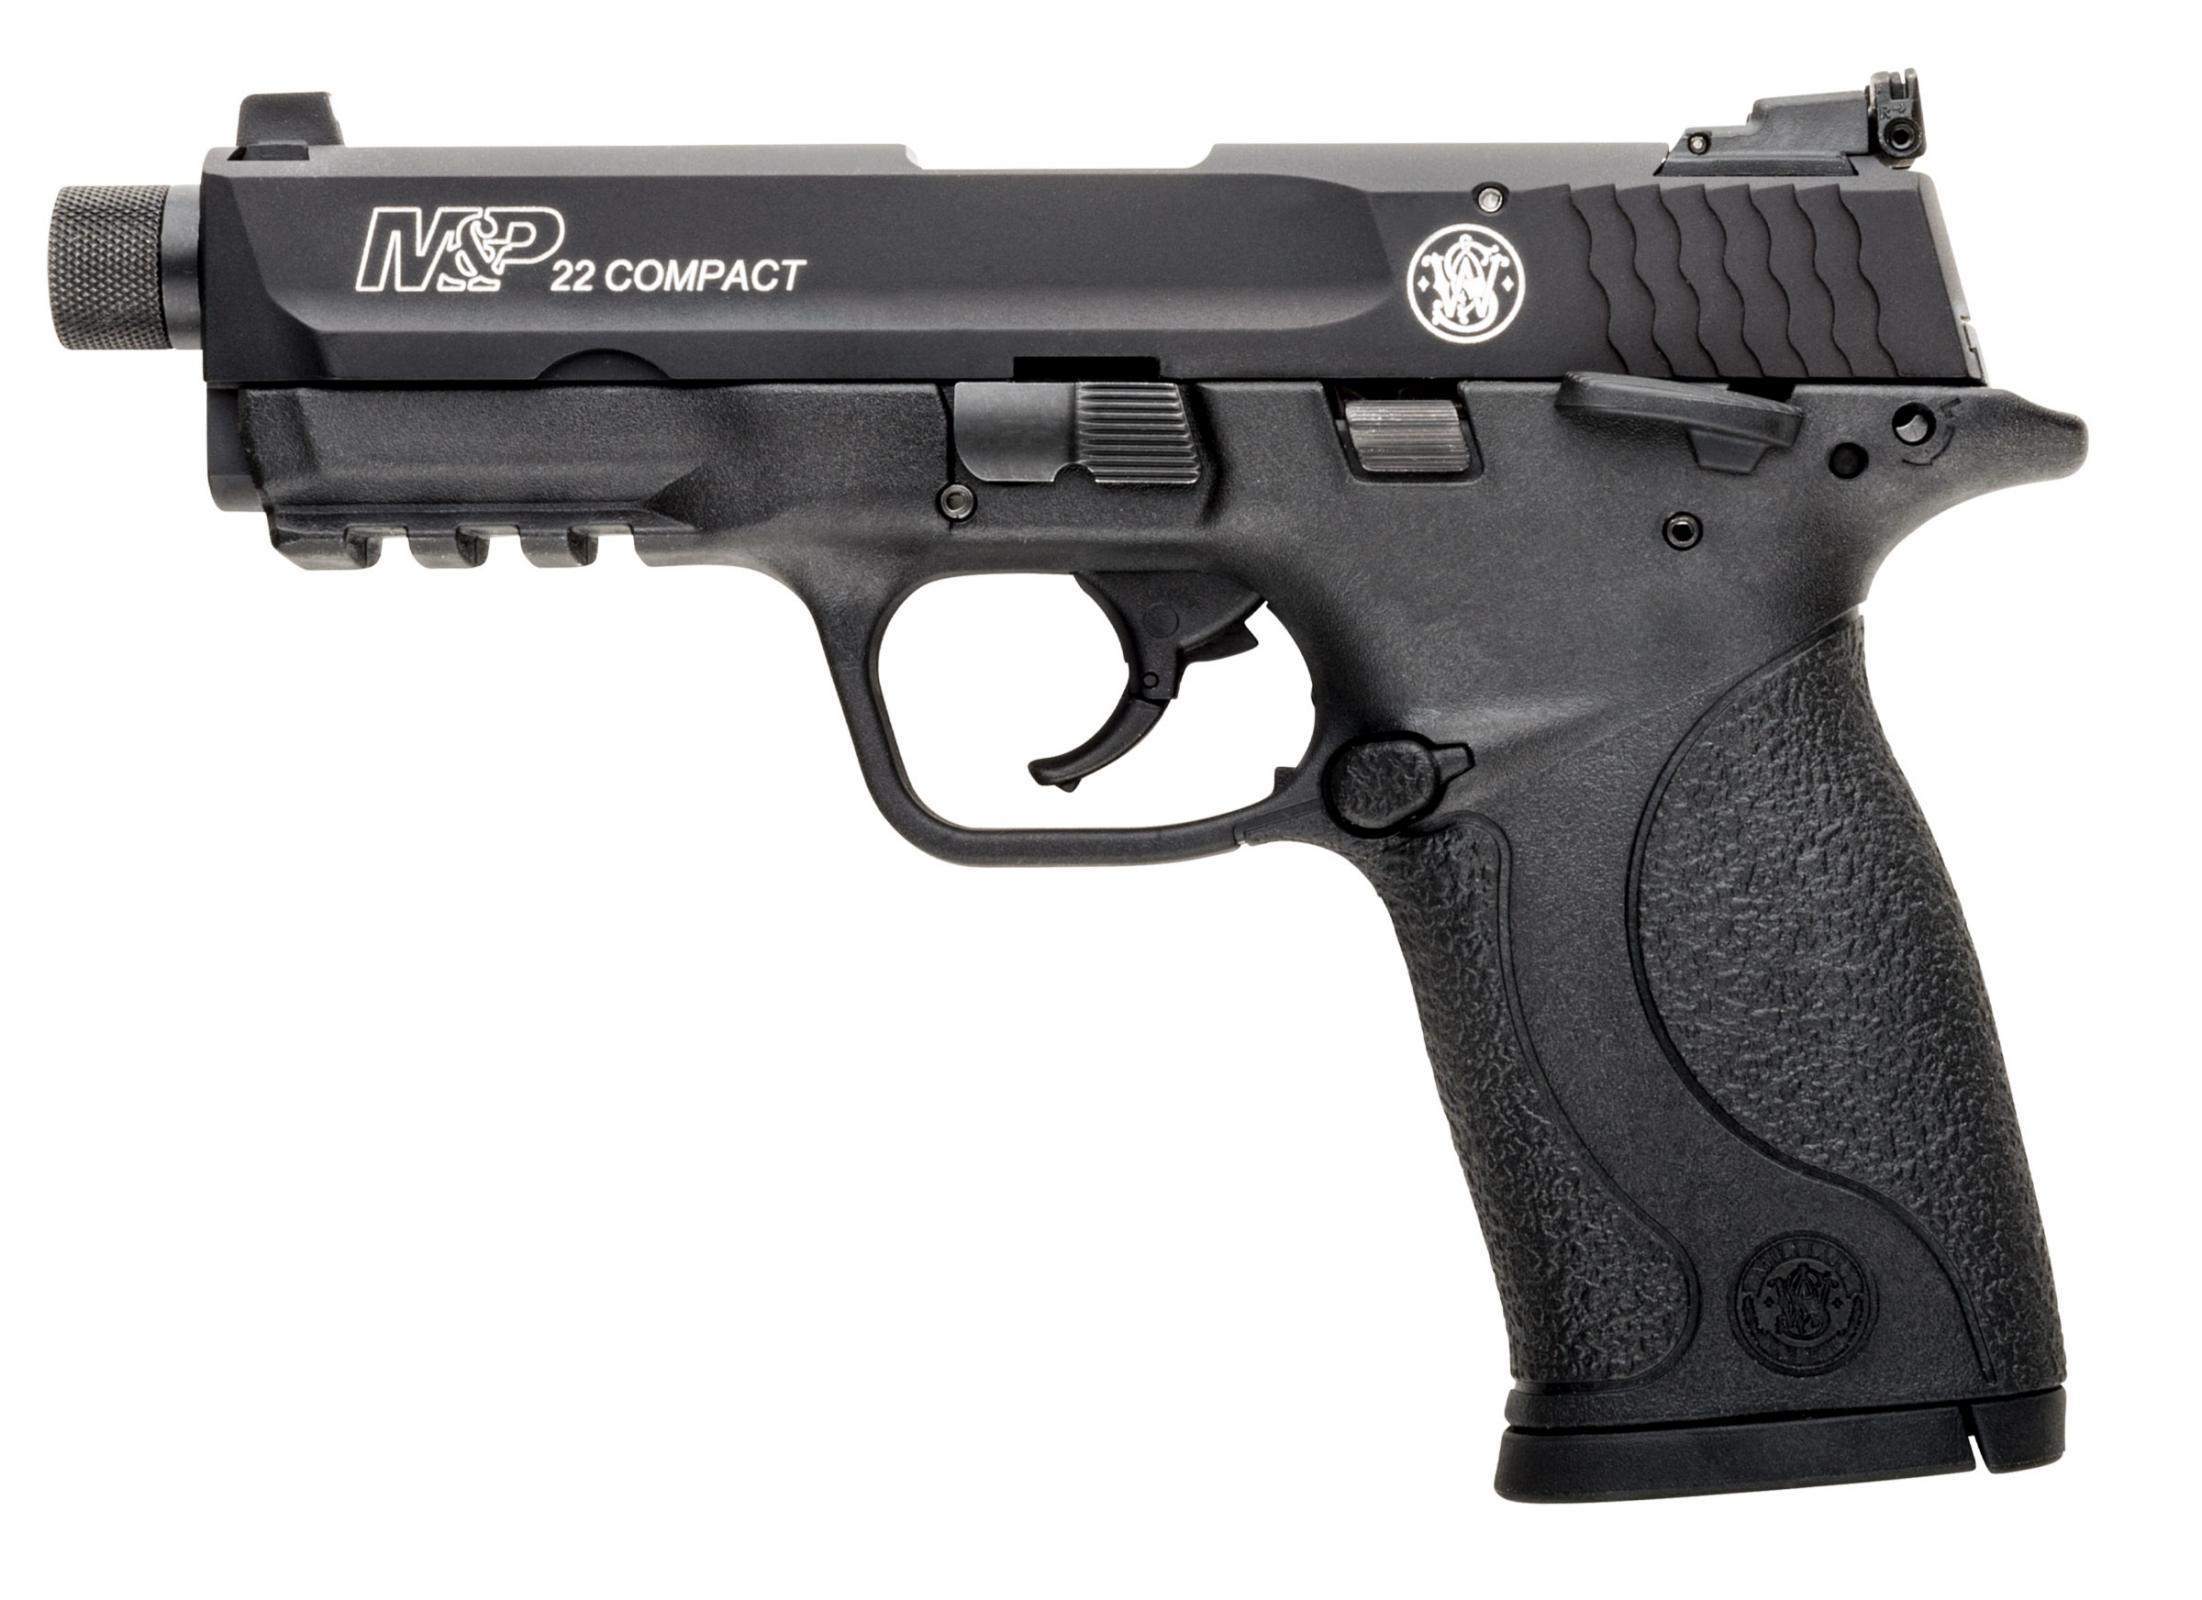 https://cityarsenal.com/product/smith-wesson-mp22-compact-22lr-pistol-with-threaded-barrel-black-2/